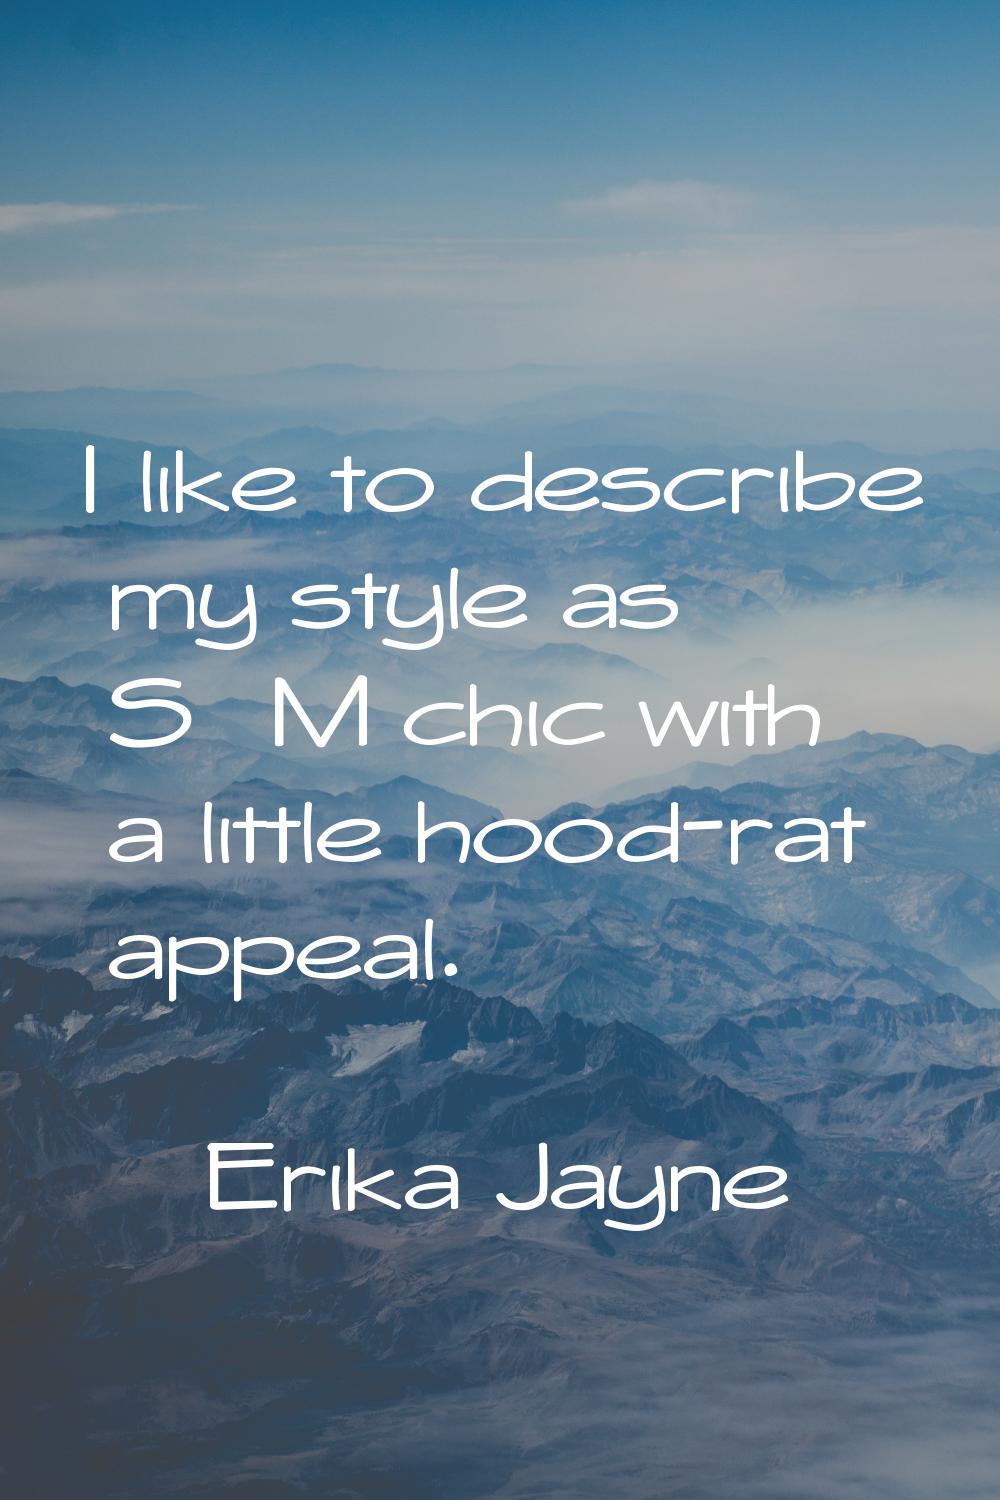 I like to describe my style as S&M chic with a little hood-rat appeal.